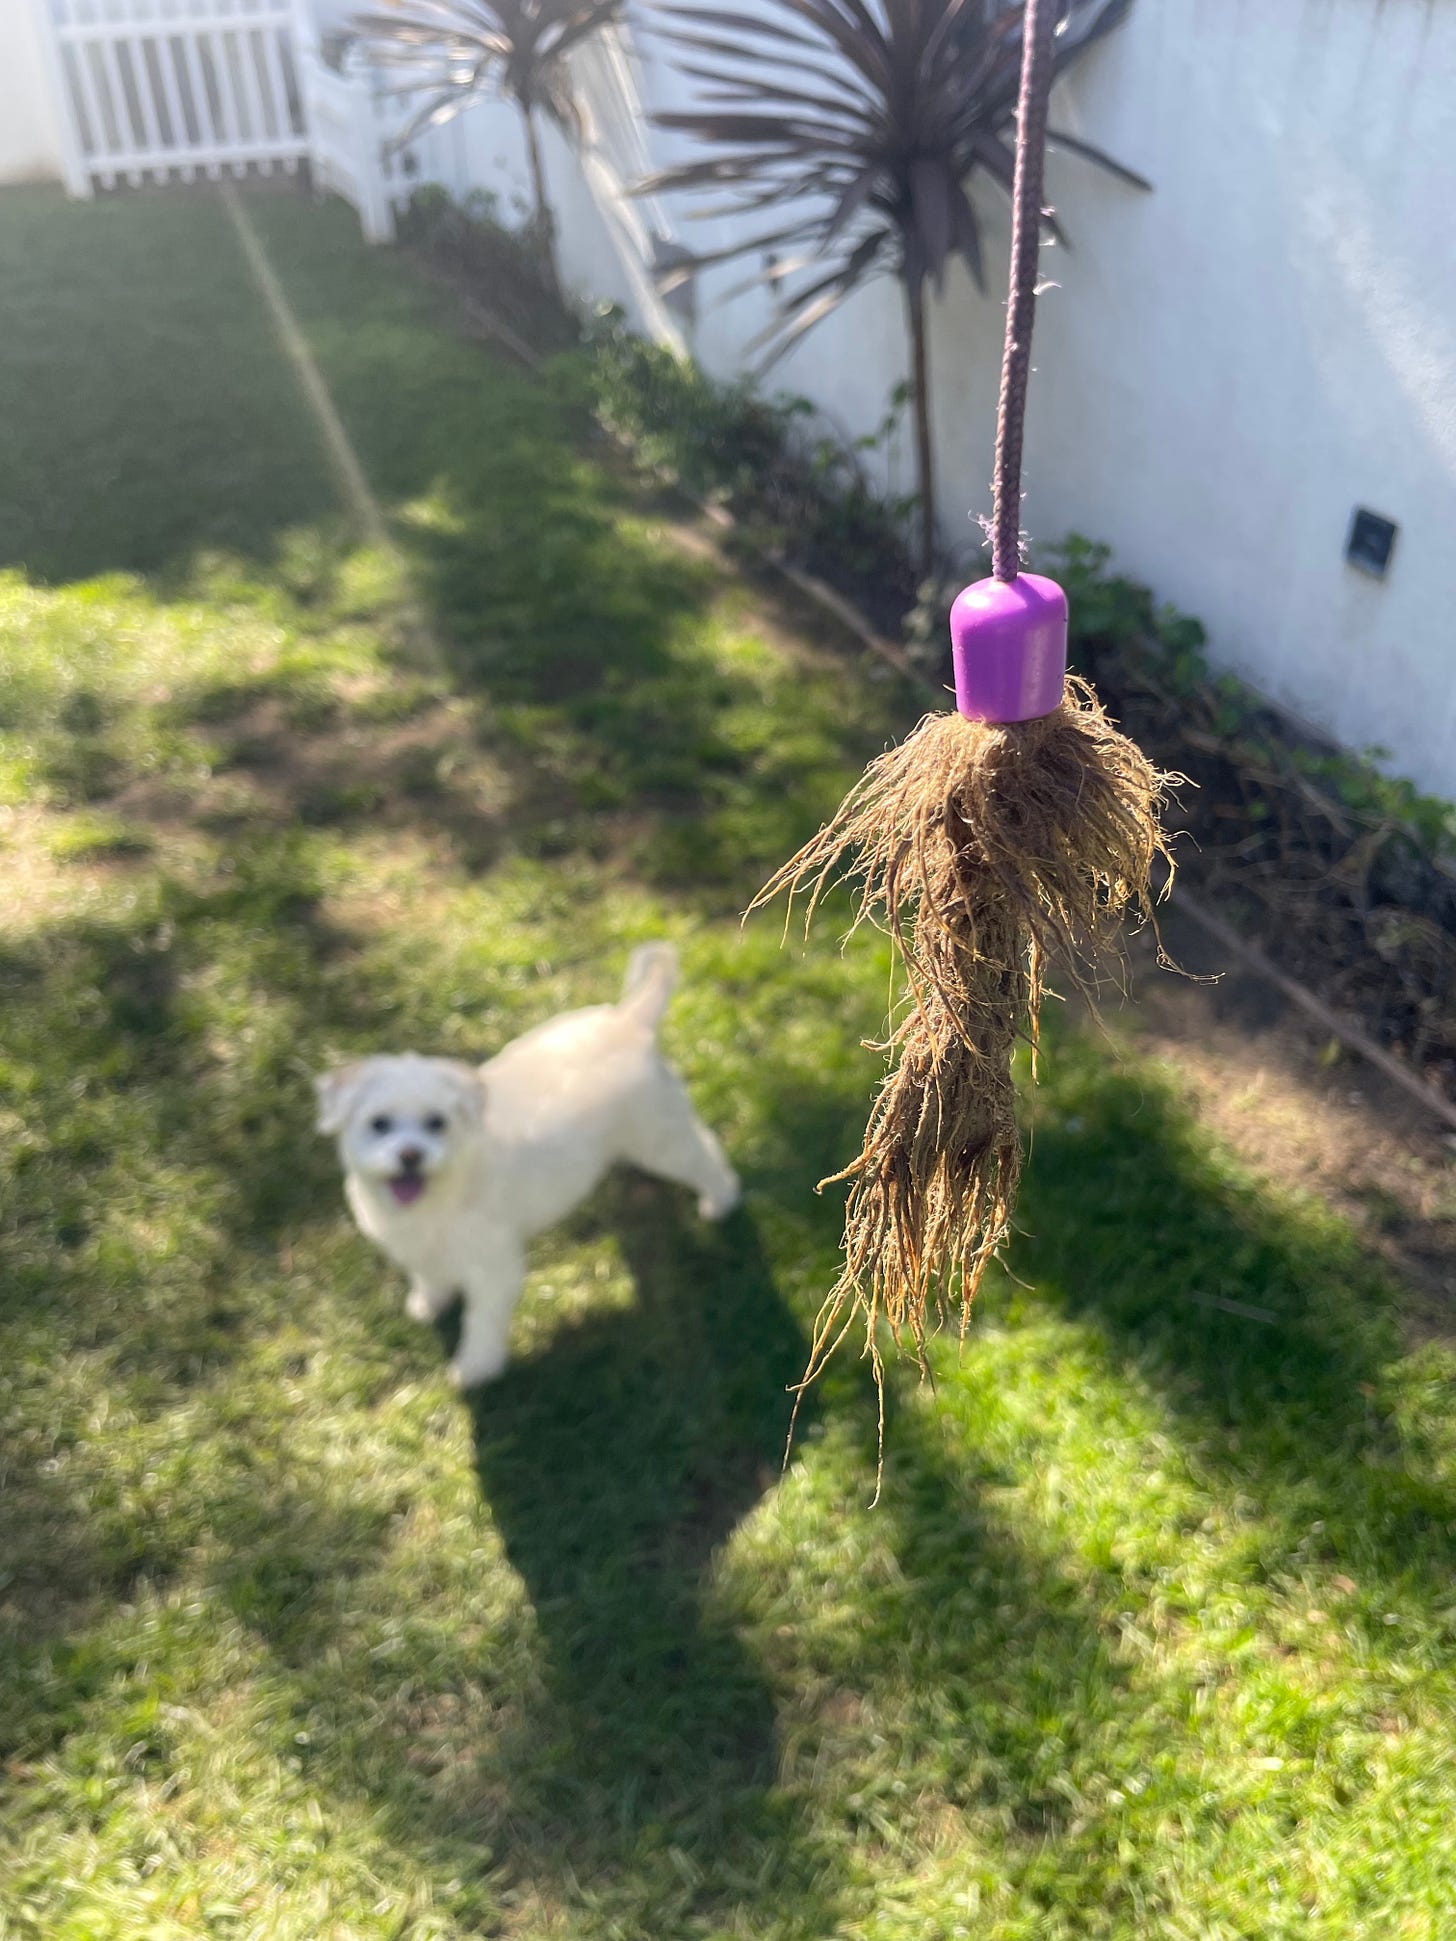 A small piece of fur attached to a purple string in the foreground. It's a cat toy. In soft focus in the background is a small white dog looking at it, smiling in anticipation.